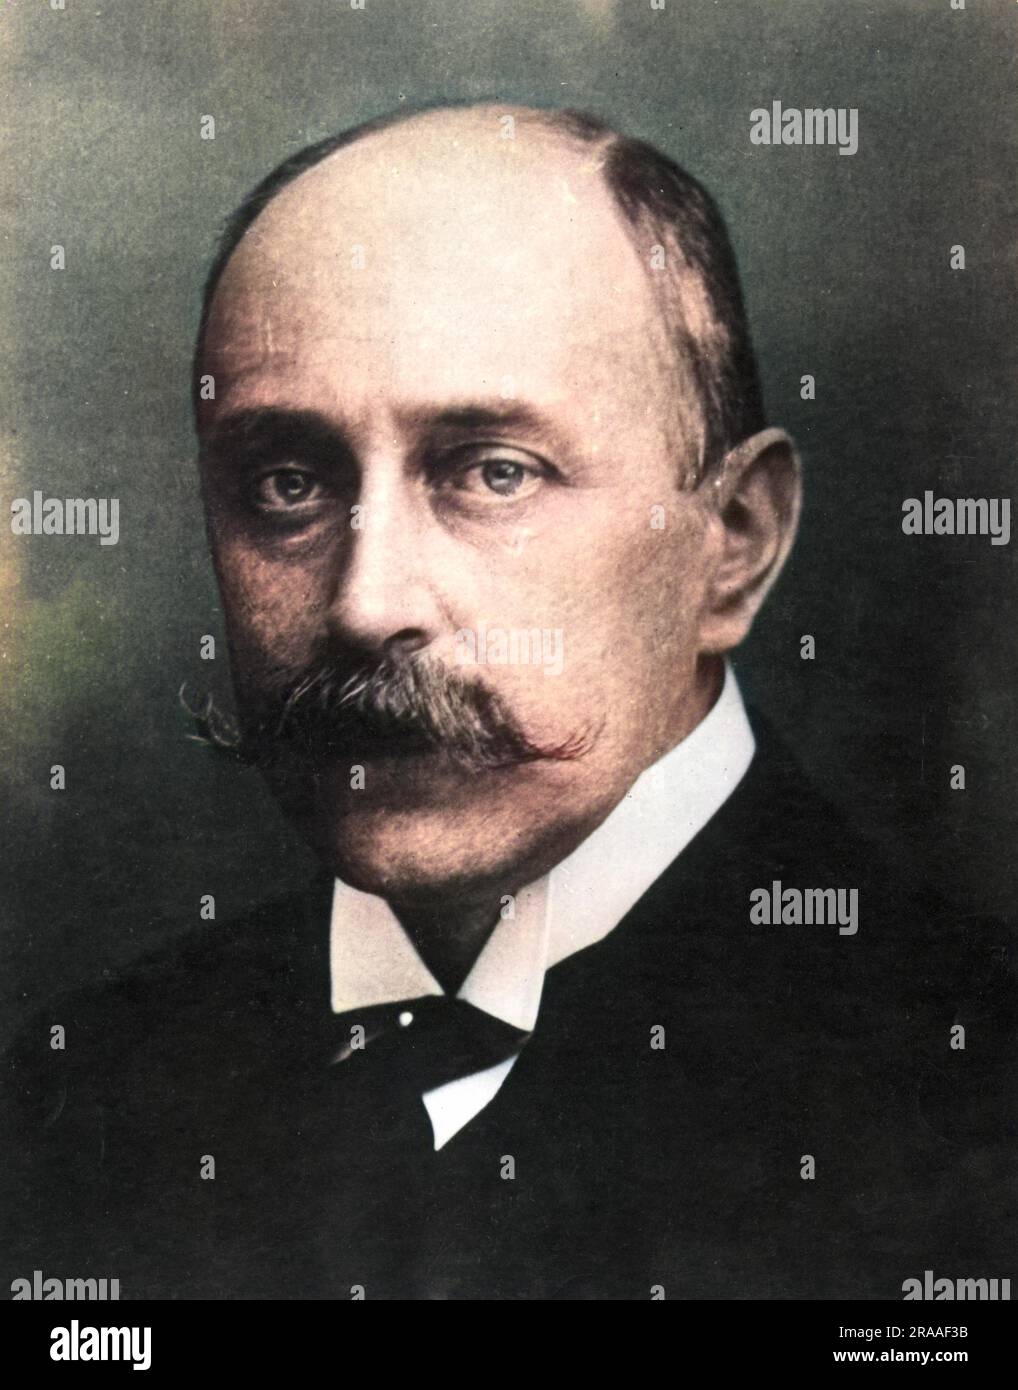 Frederik Alfred Lohmann (1870-1919), German merchant based in Bremen.  During the First World War he took part in the development of merchant submarines (U-boats), including the Deutschland, to bypass British blockades of shipping.     Date: early 20th century Stock Photo